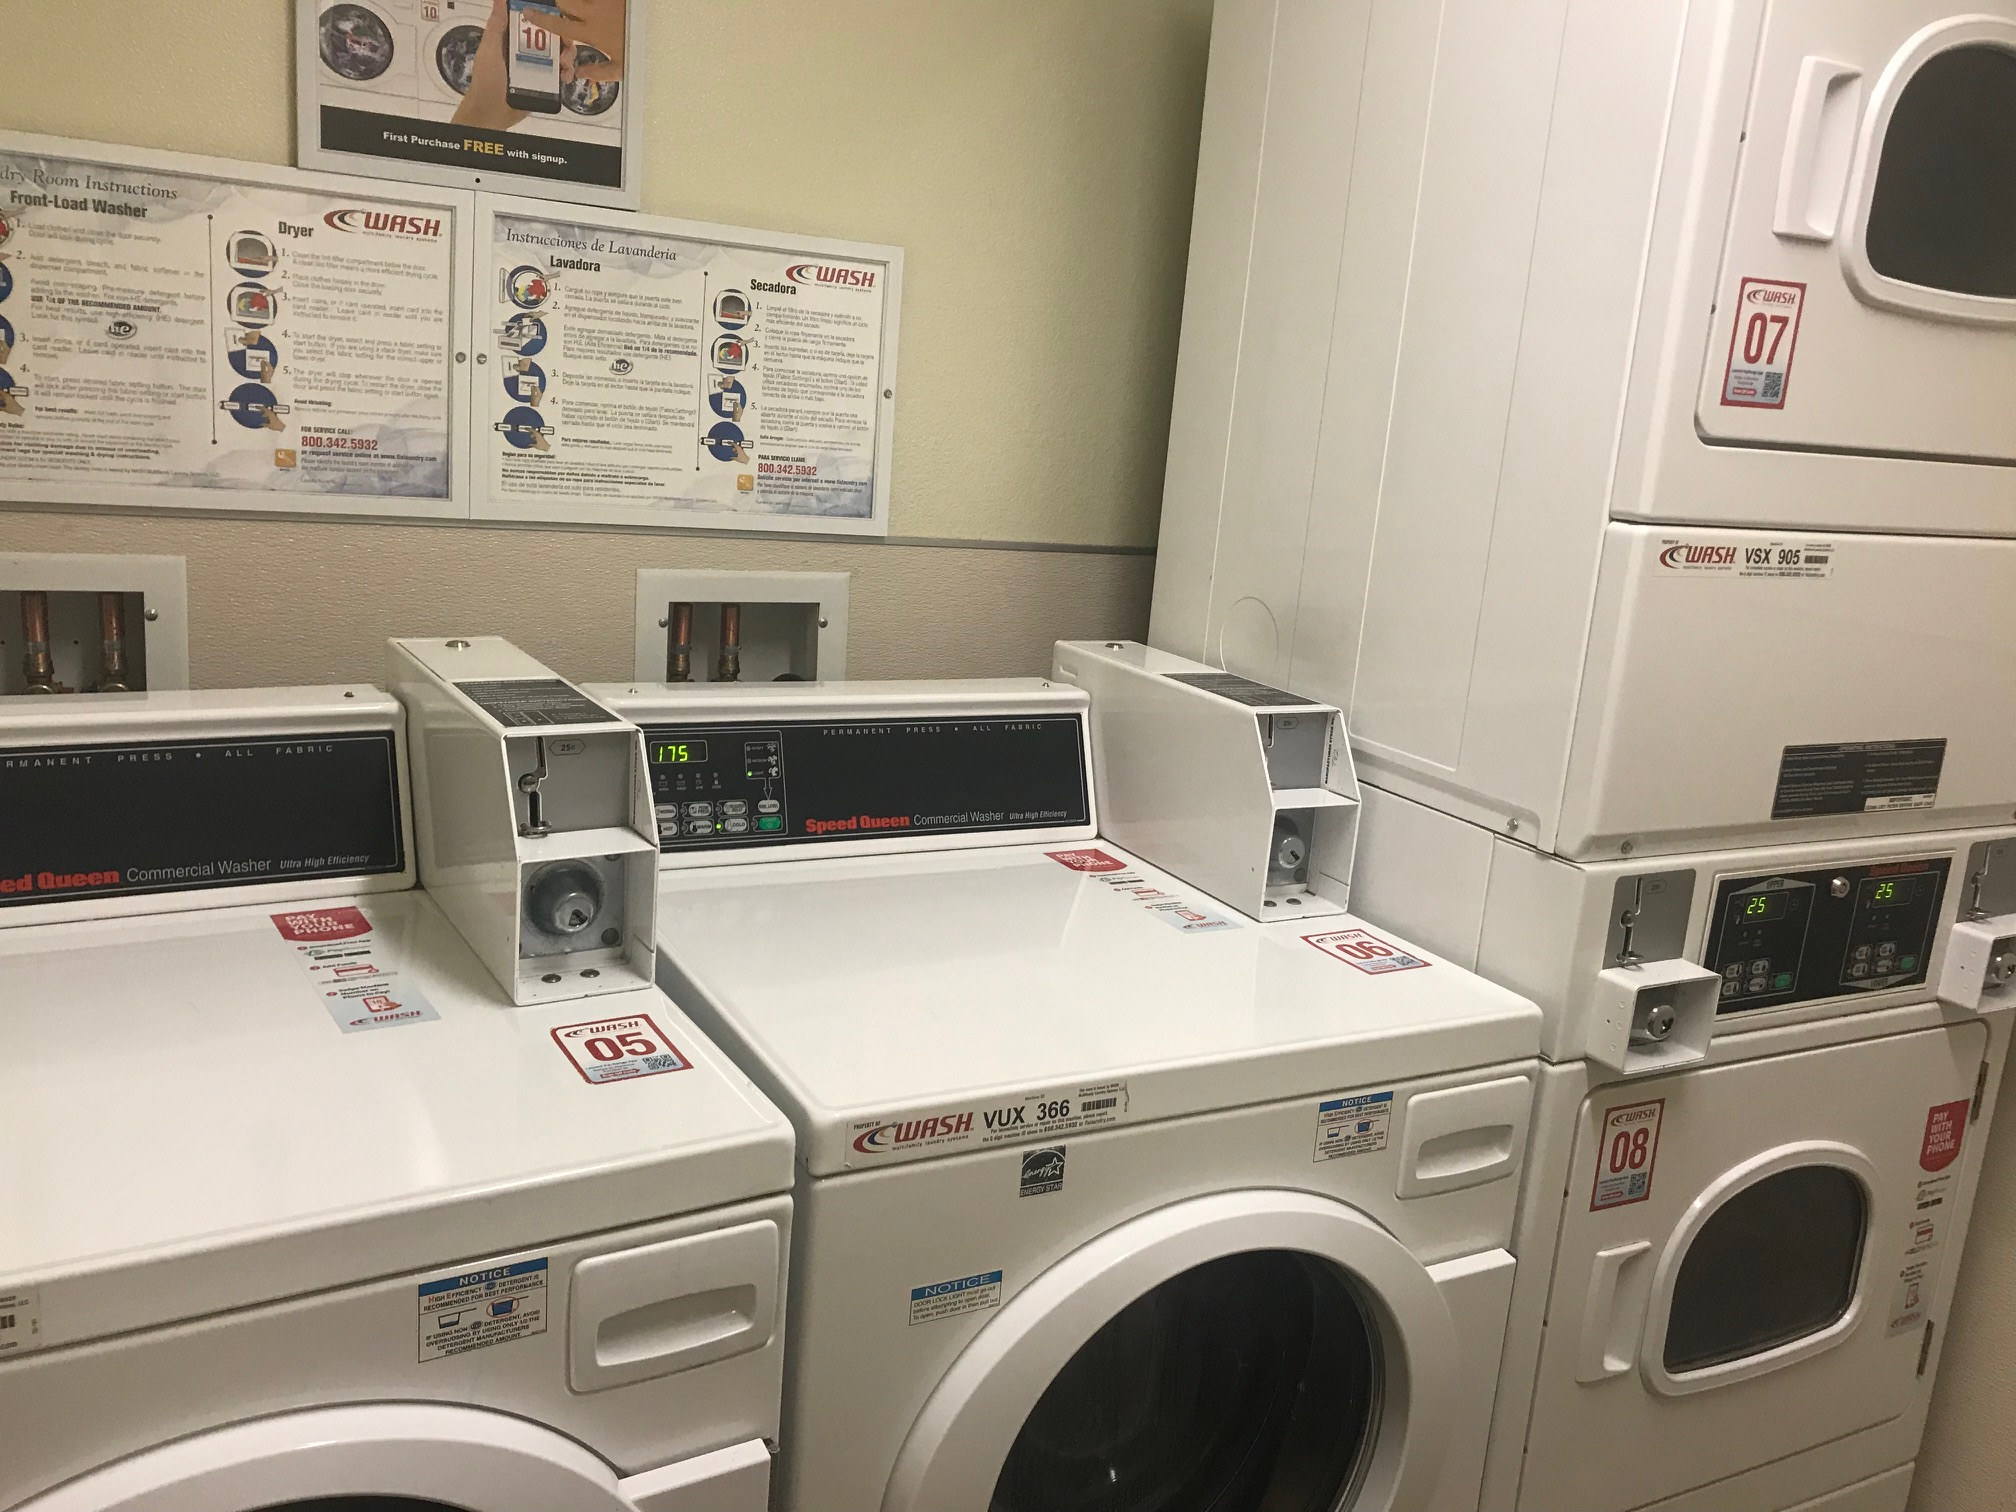 Laundry room with white appliances. Washer and dryer are coin operated. Washers are ground level and dryers are vertically double stacked. There are instructions posted on the wall on how to operate appliances.